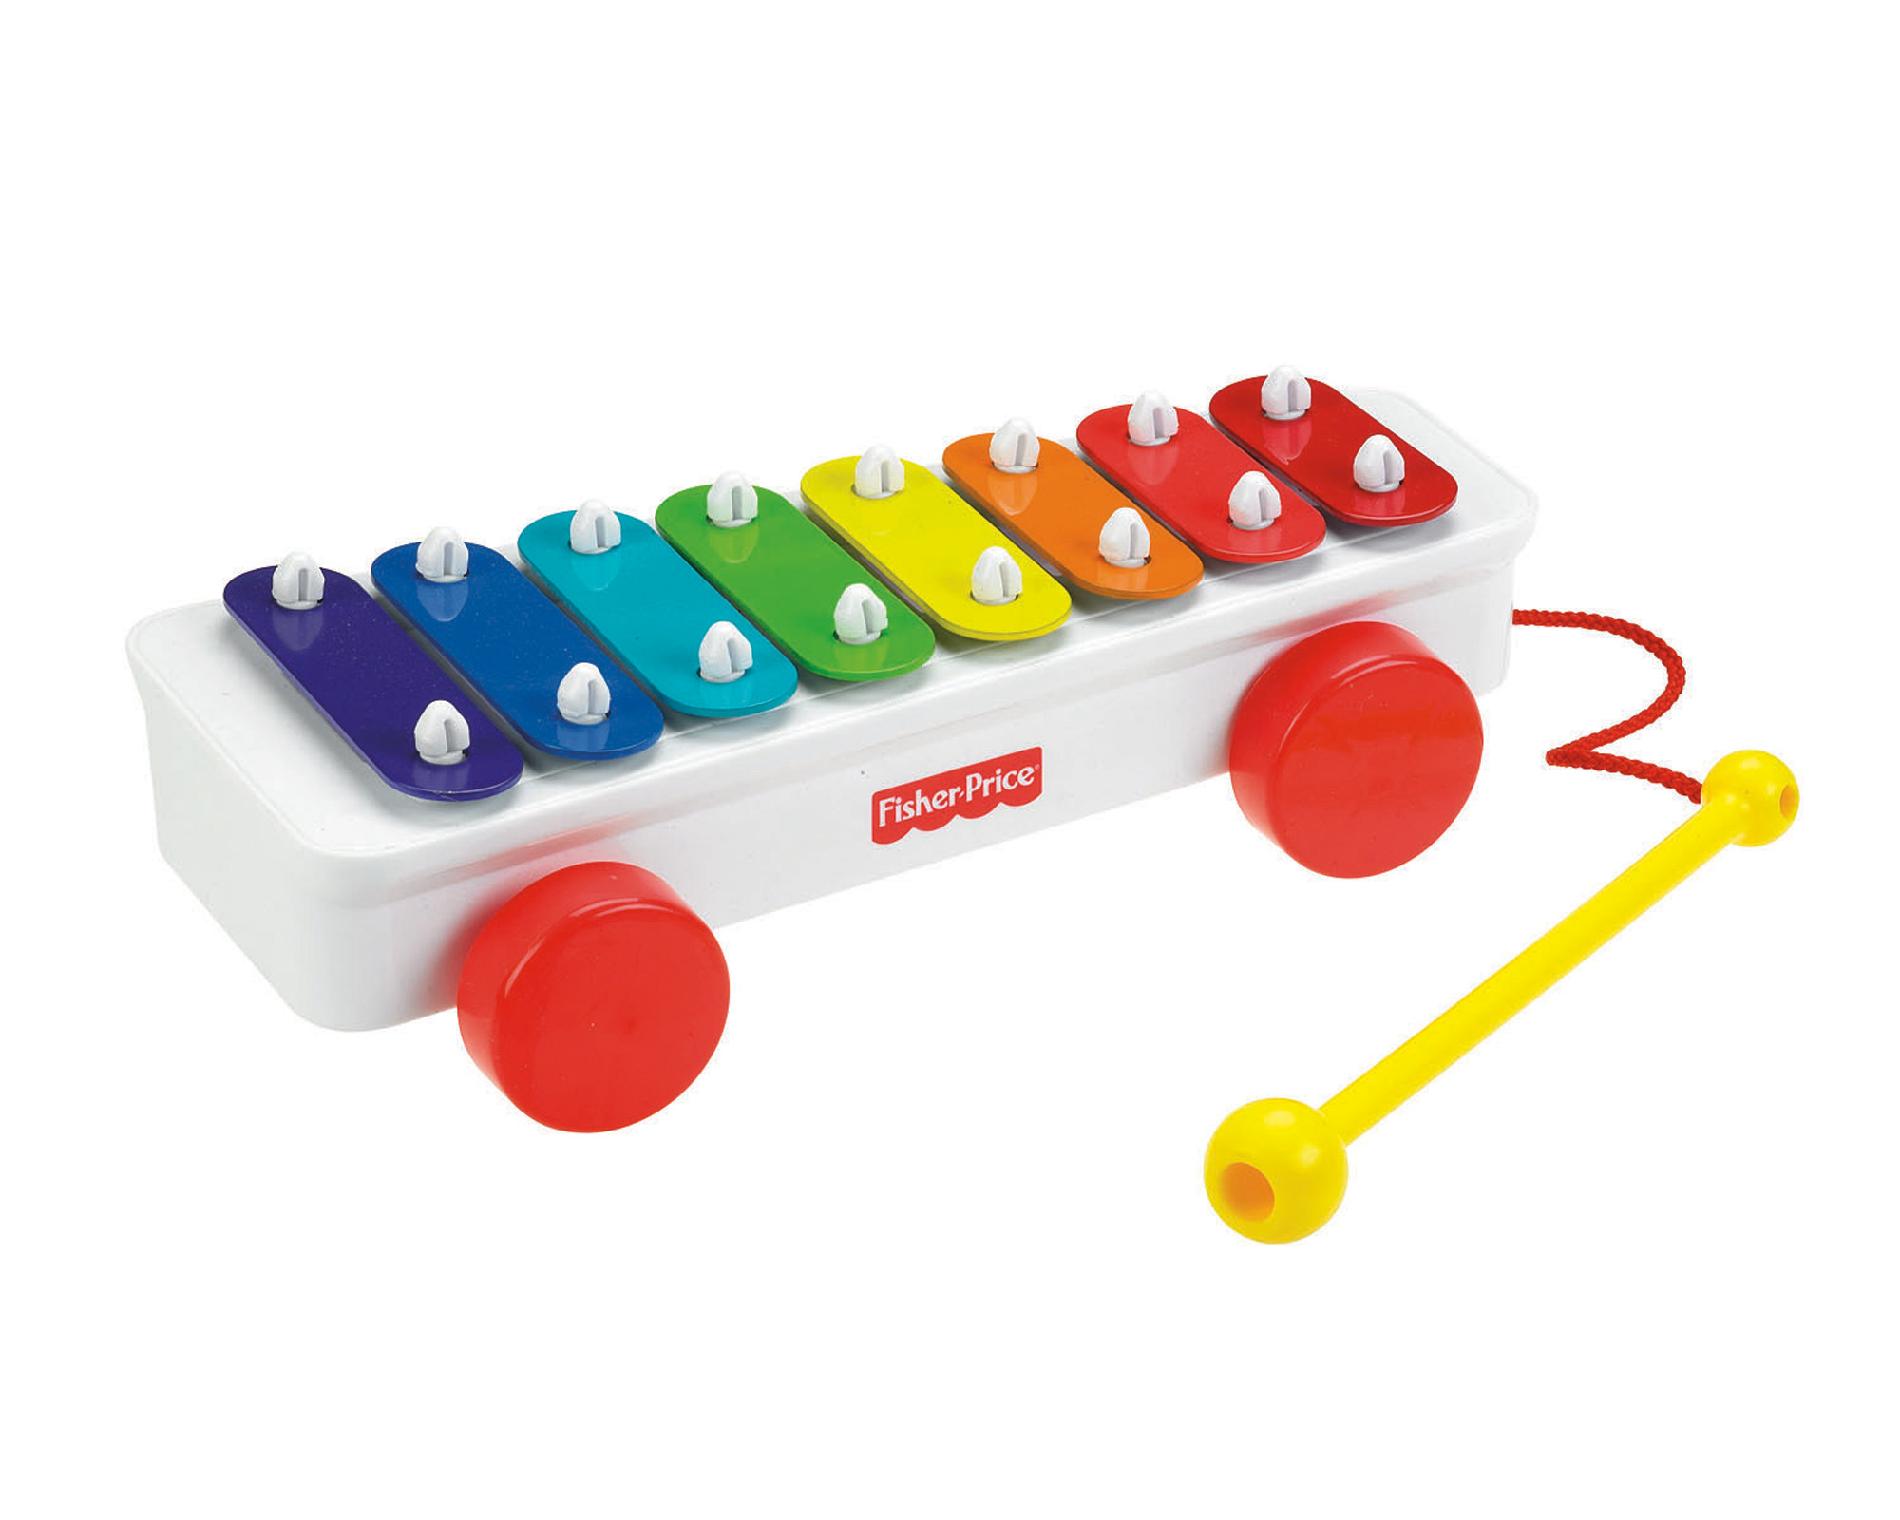 FisherPrice Classic Xylophone Toys & Games Musical